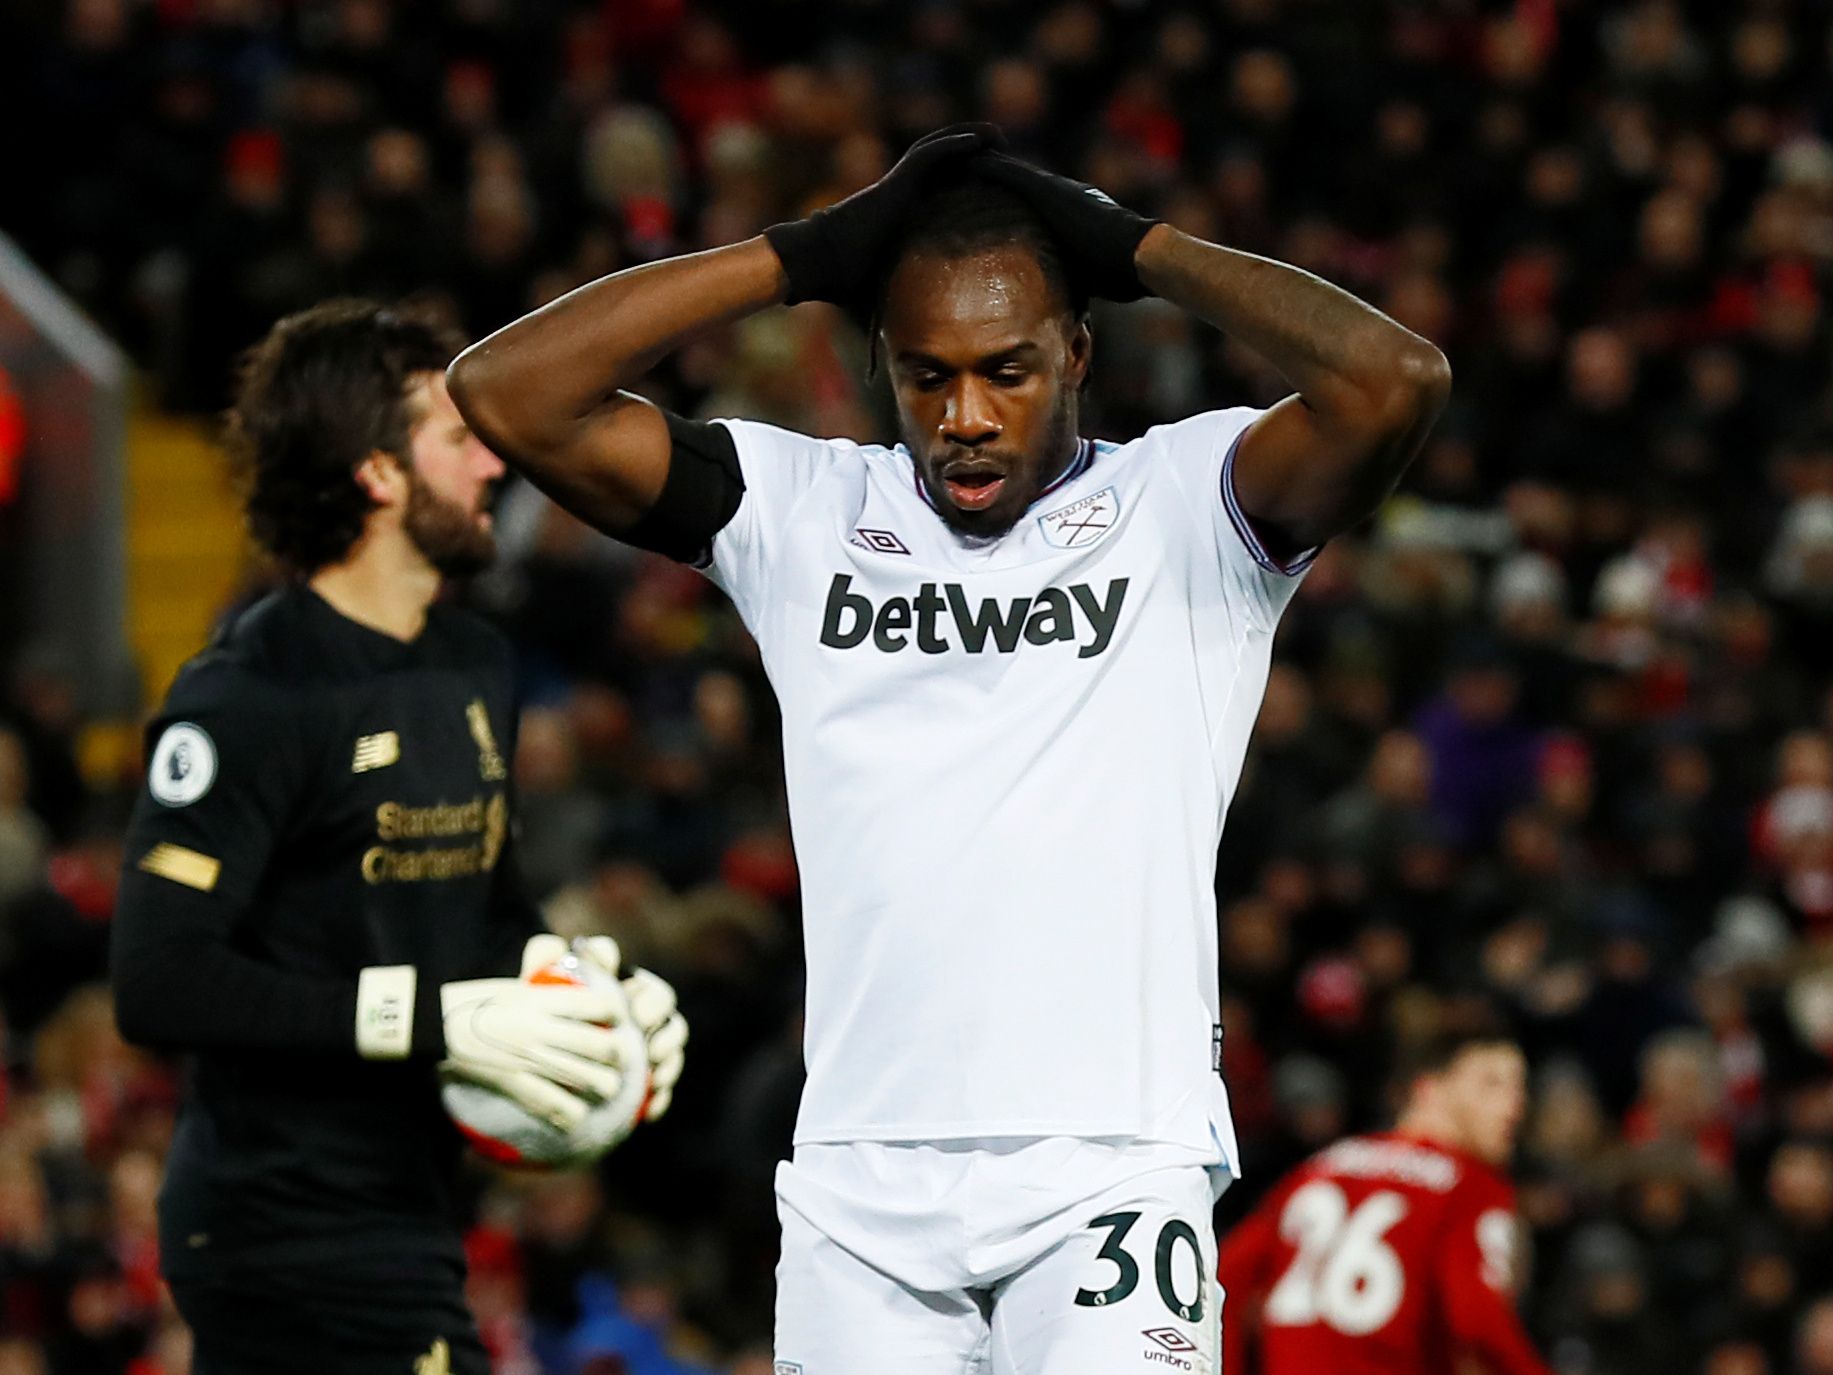 Soccer Football - Premier League - Liverpool v West Ham United - Anfield, Liverpool, Britain - February 24, 2020  West Ham United's Michail Antonio reacts after a missed chance  Action Images via Reuters/Jason Cairnduff  EDITORIAL USE ONLY. No use with unauthorized audio, video, data, fixture lists, club/league logos or 